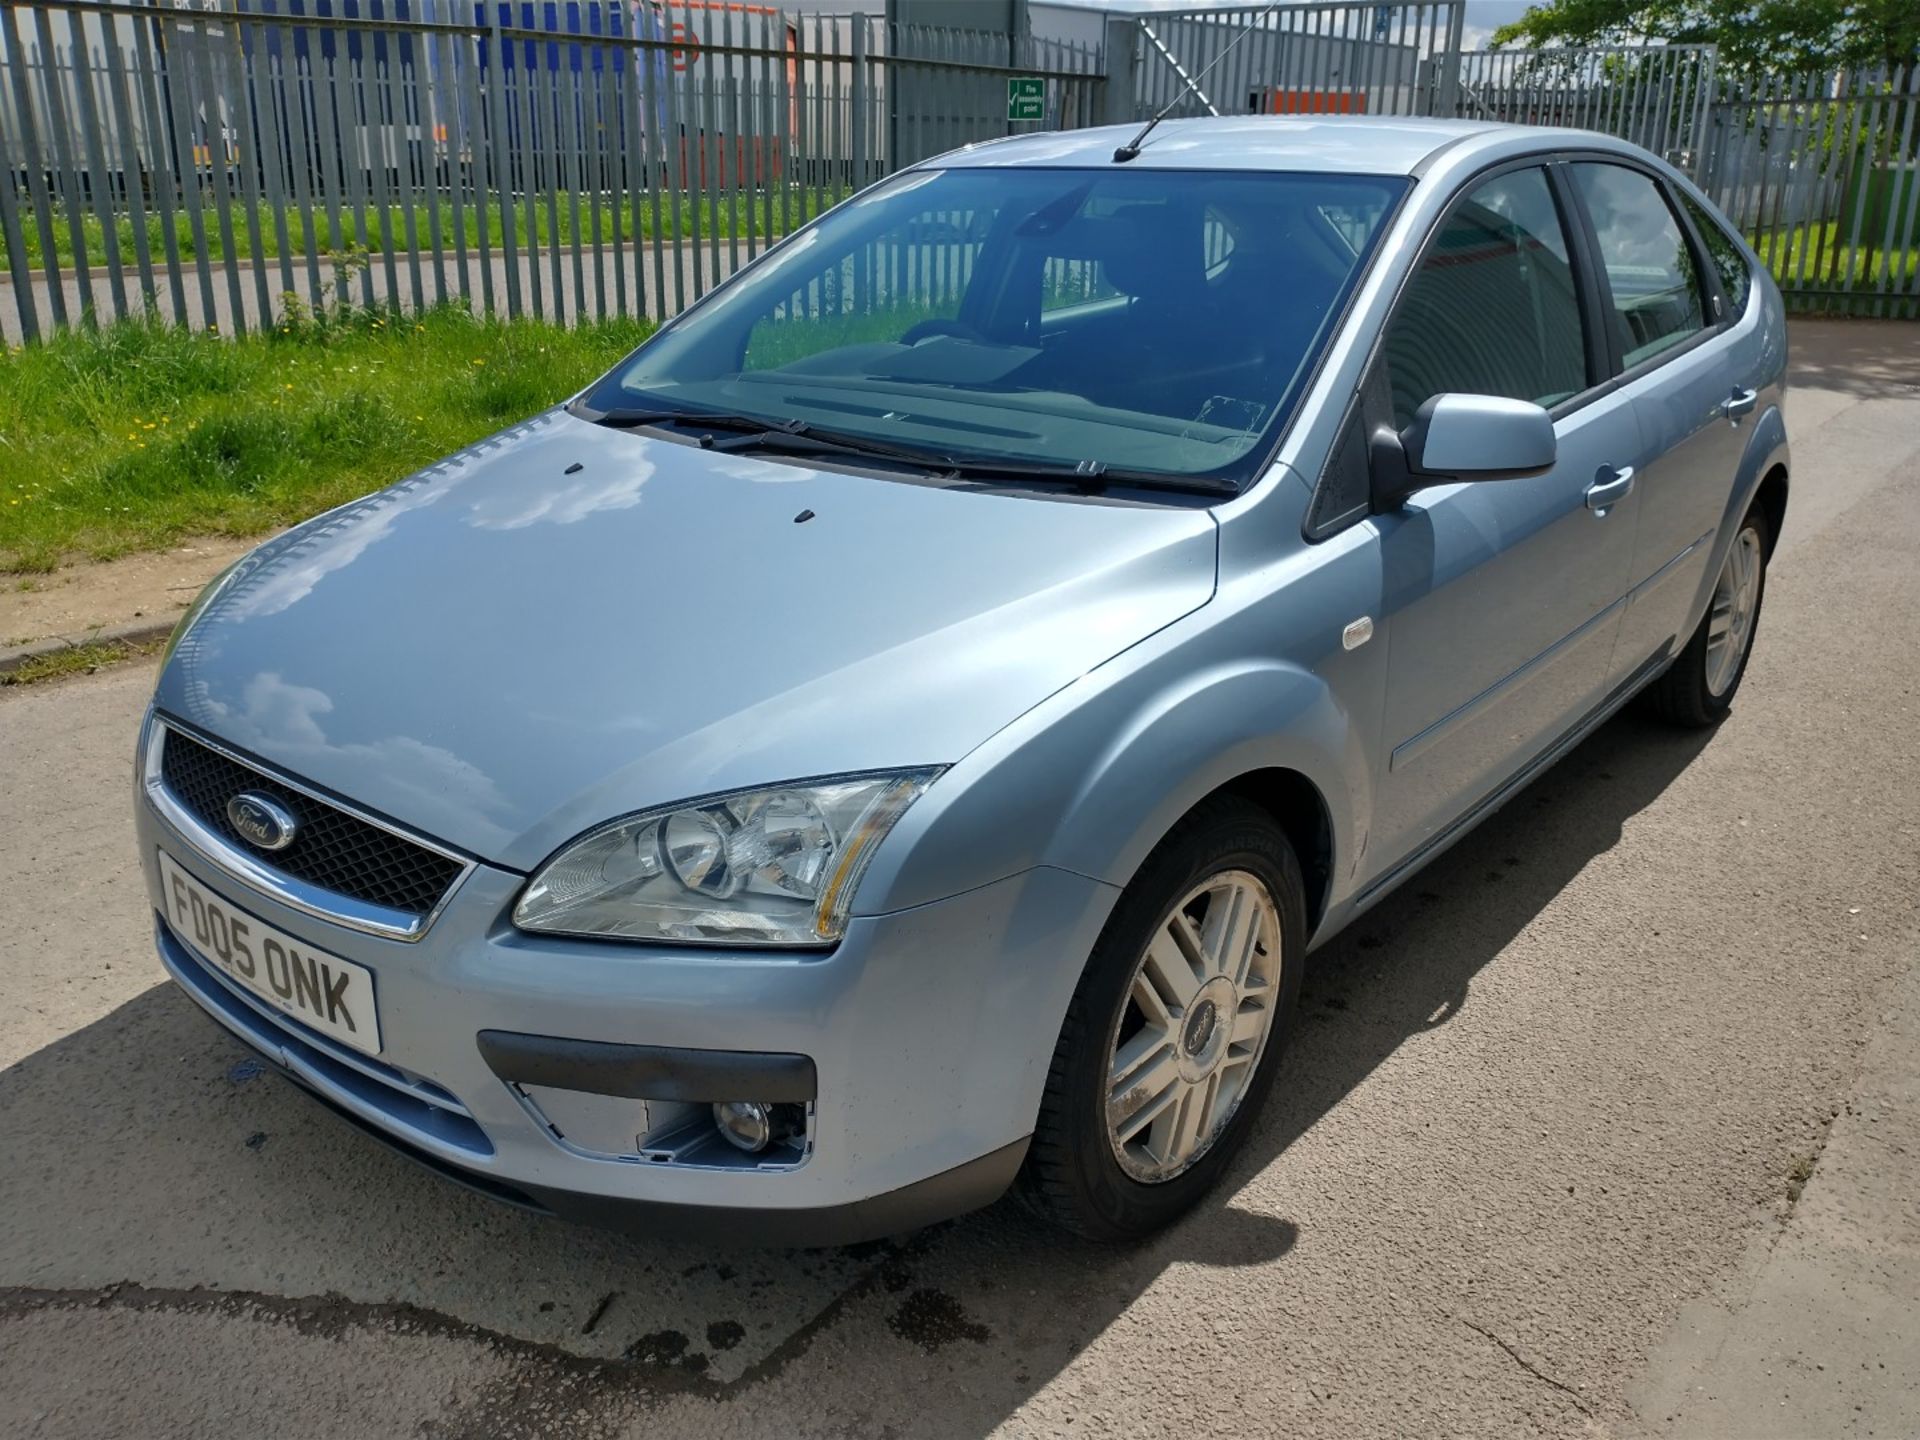 2005 Ford Focus Ghia T 5dr Hatchback - CL505 - NO VAT ON THE HAMMER - Location: Corby - Image 13 of 26